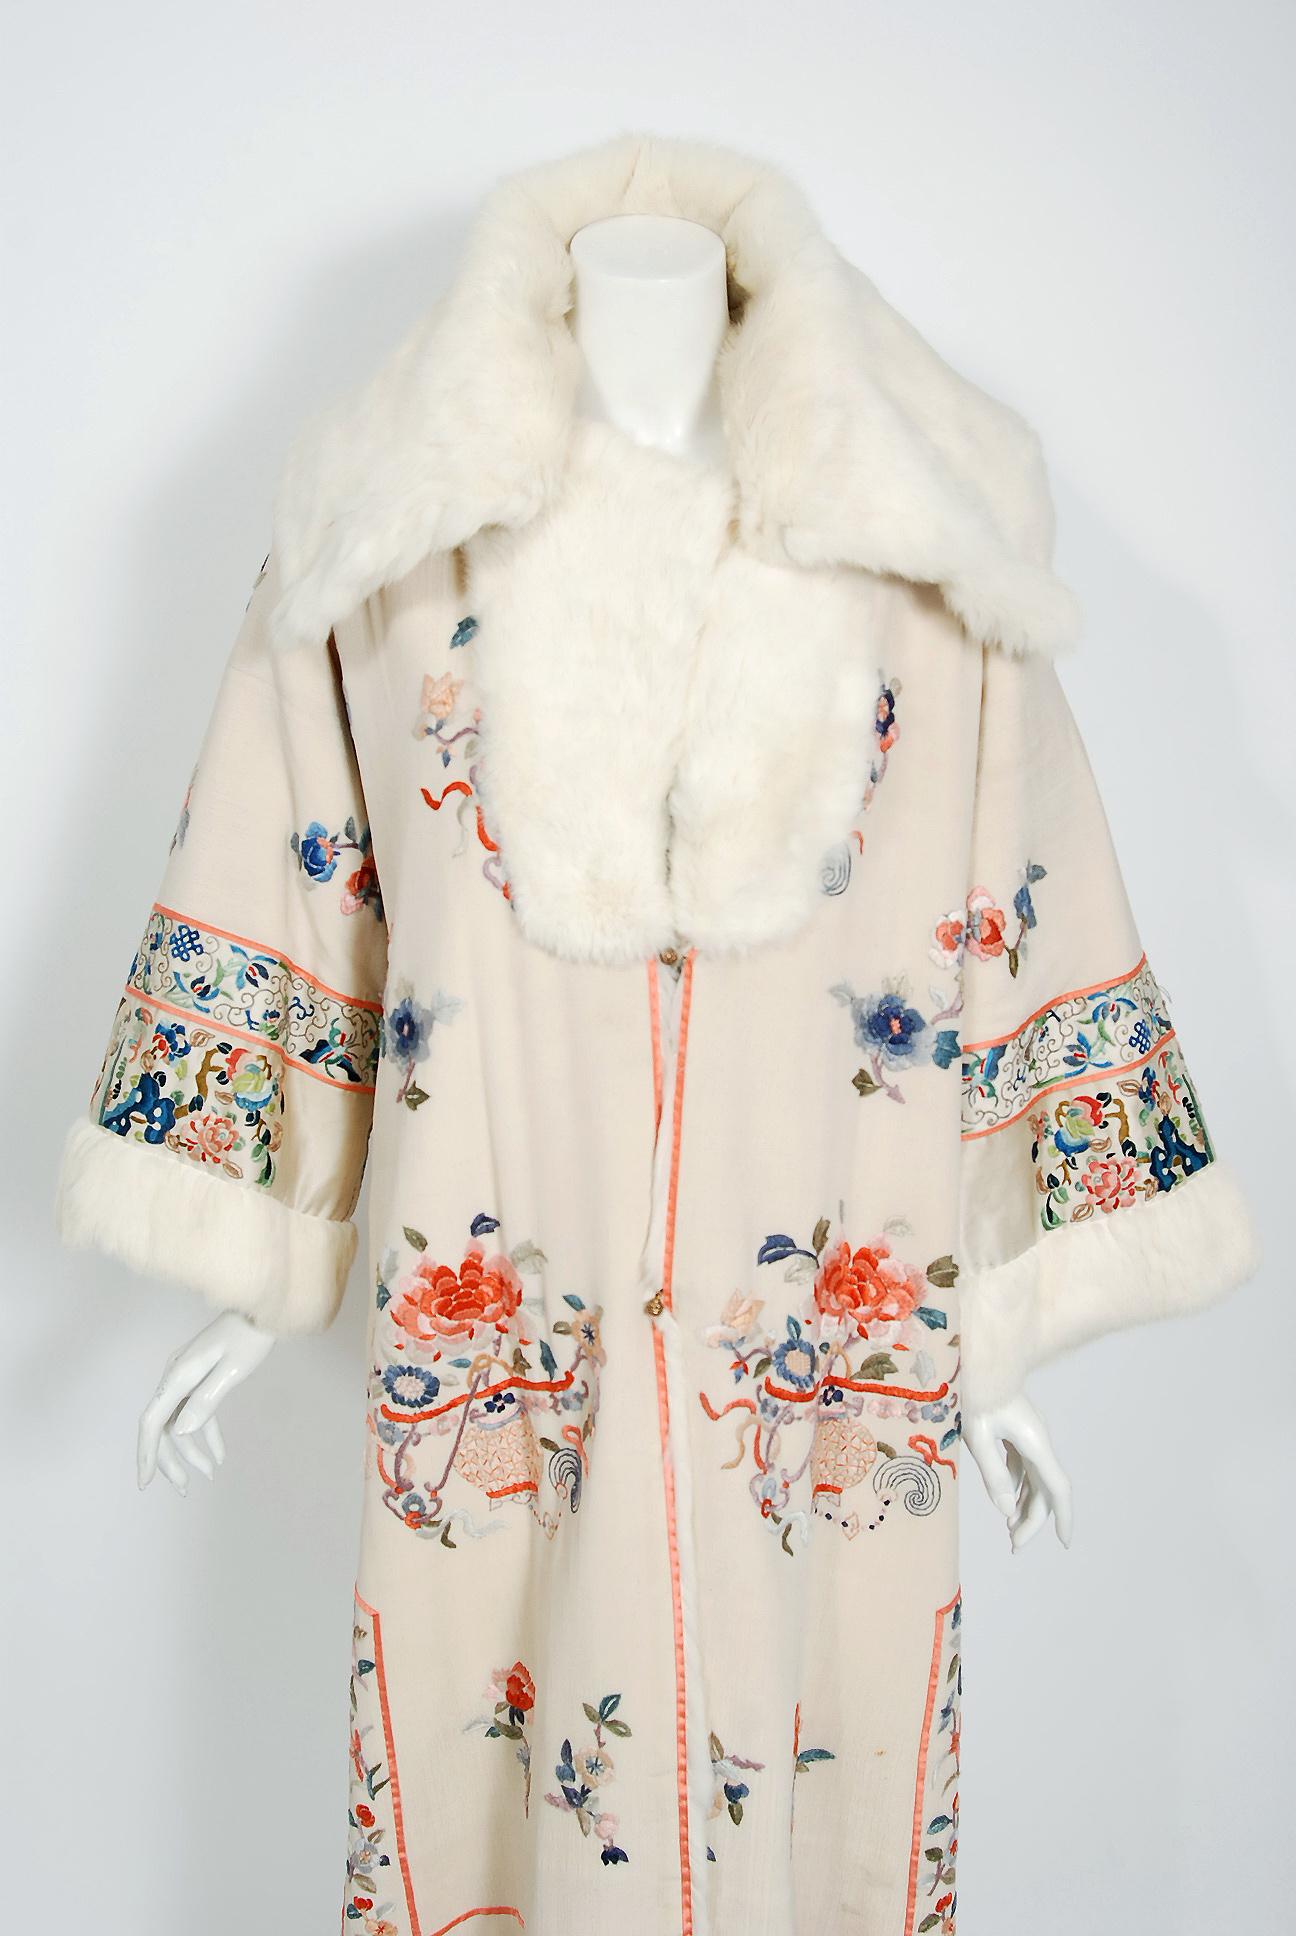 Breathtaking ivory silk-crepe embroidered Chinese couture reversible coat dating back to the mid 1920's. The colorful novelty scenic embroidery adds a perfect amount of drama to this luxury treasure. I love the oversized collar and brass ball